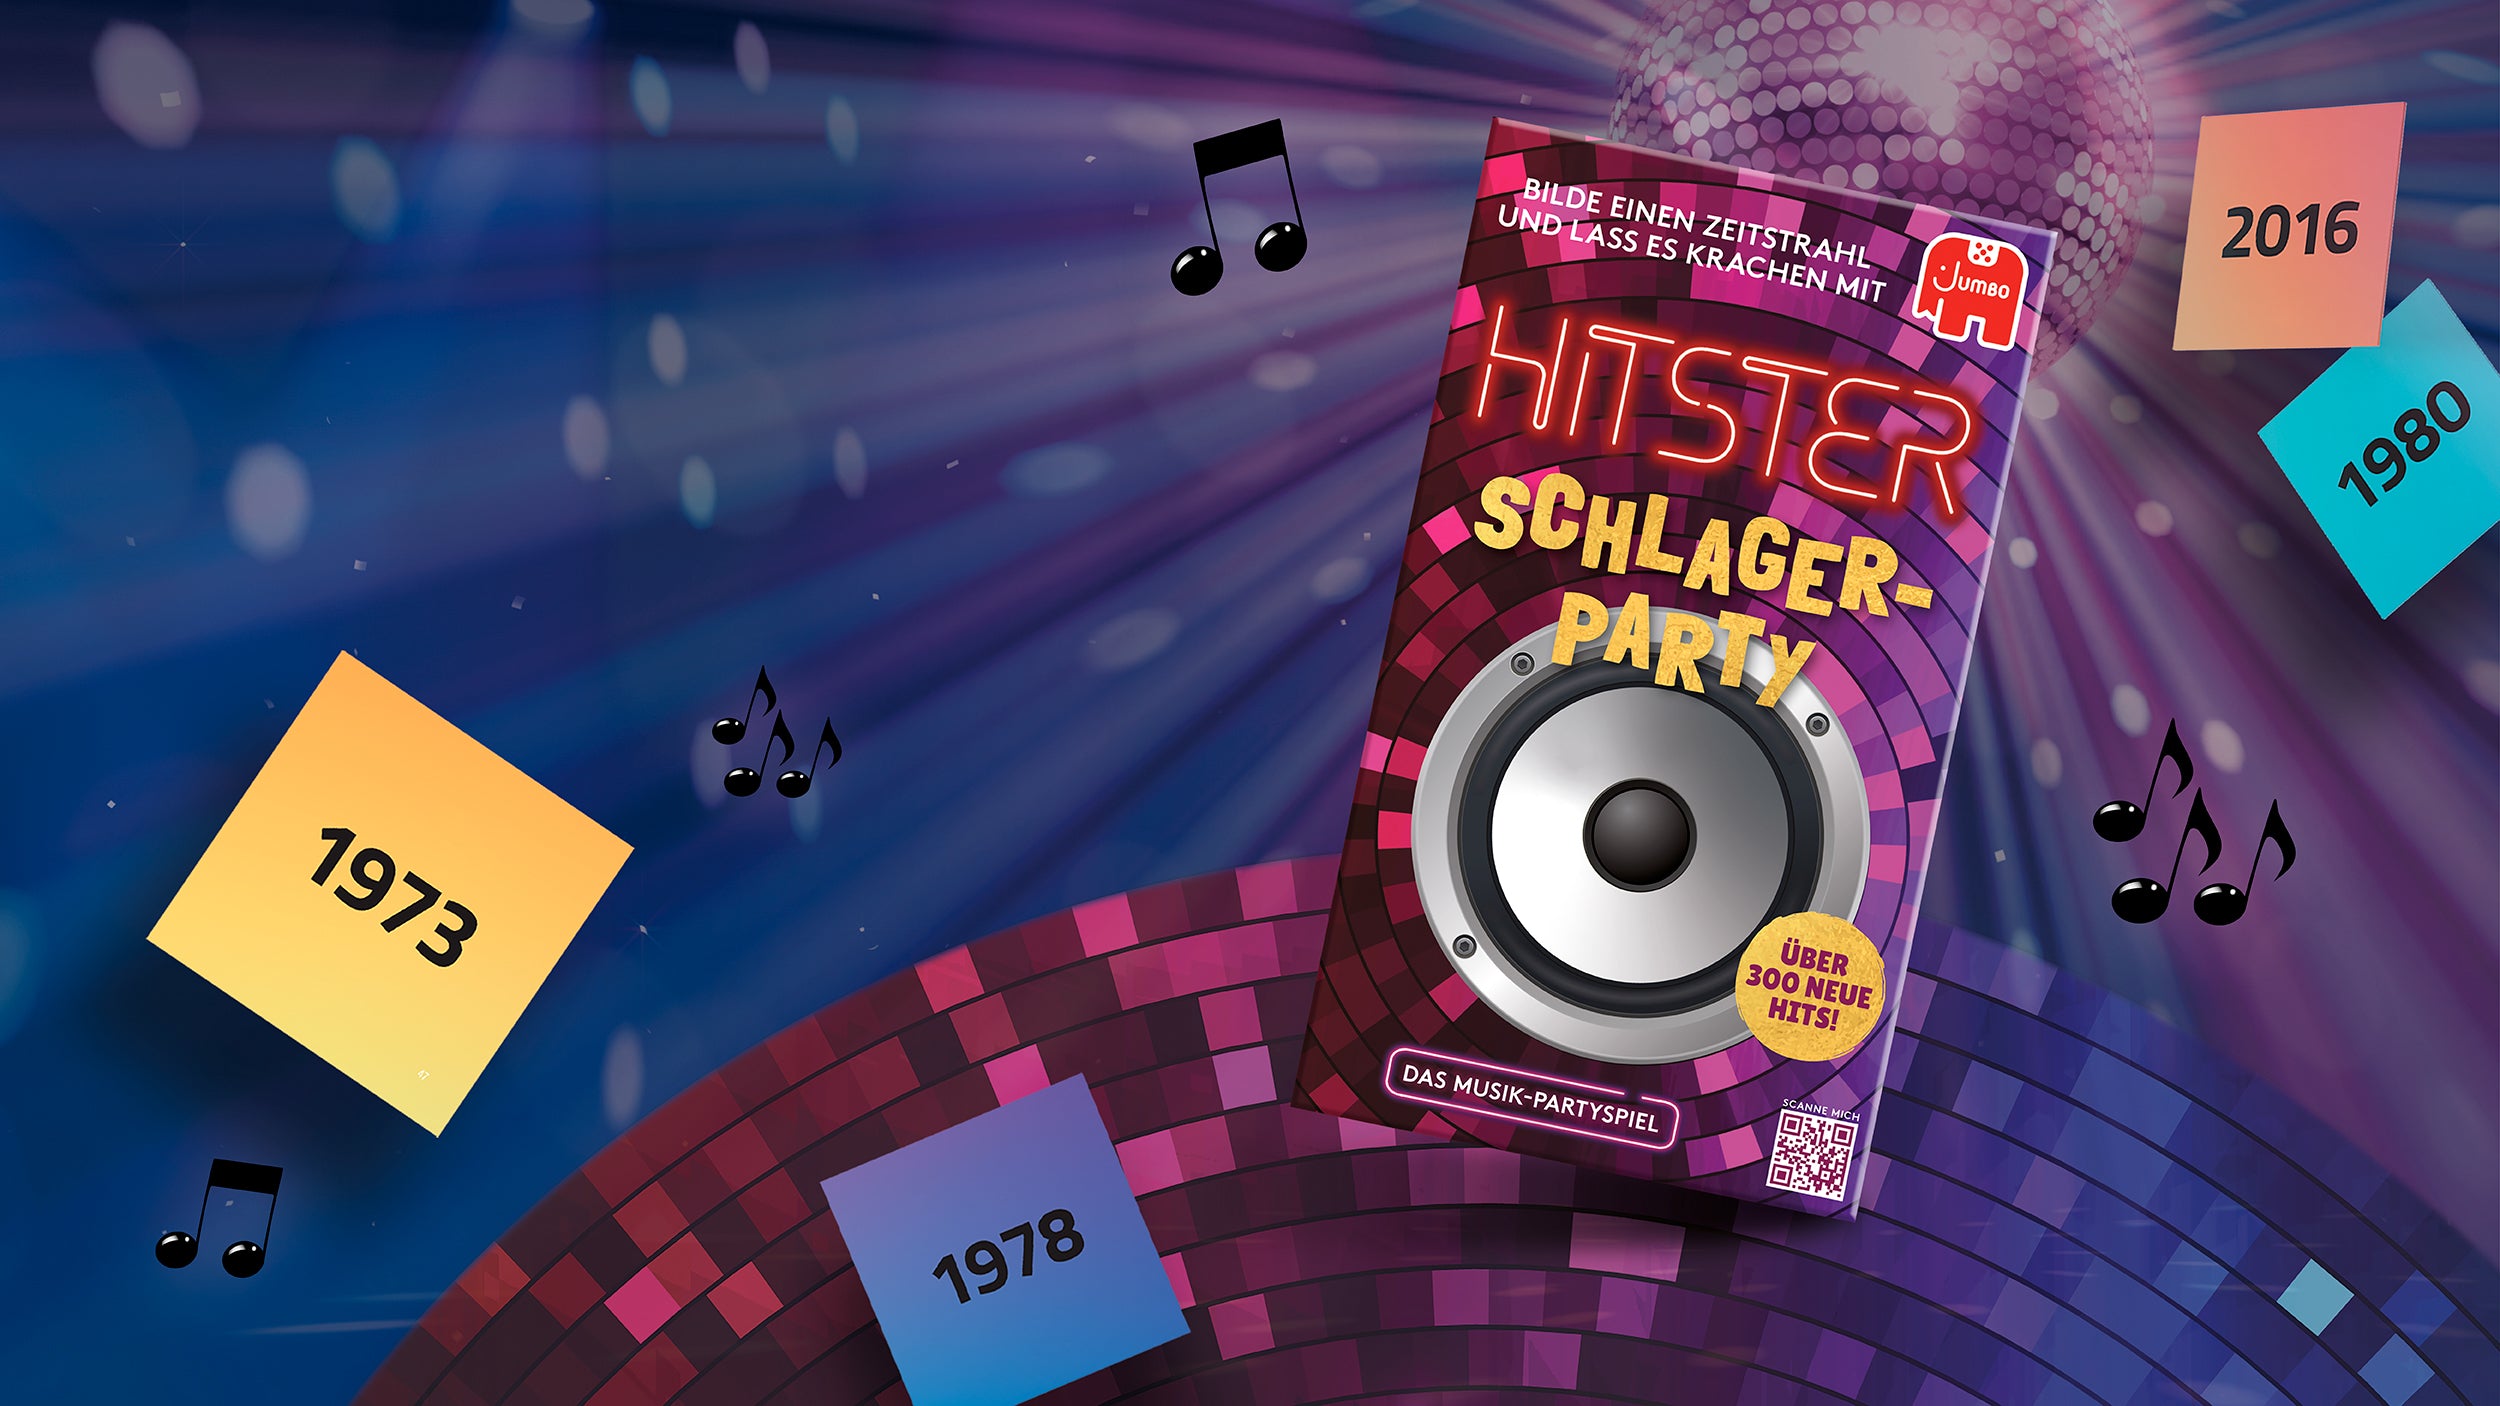 Web_Hitster_Schlagerparty-banner